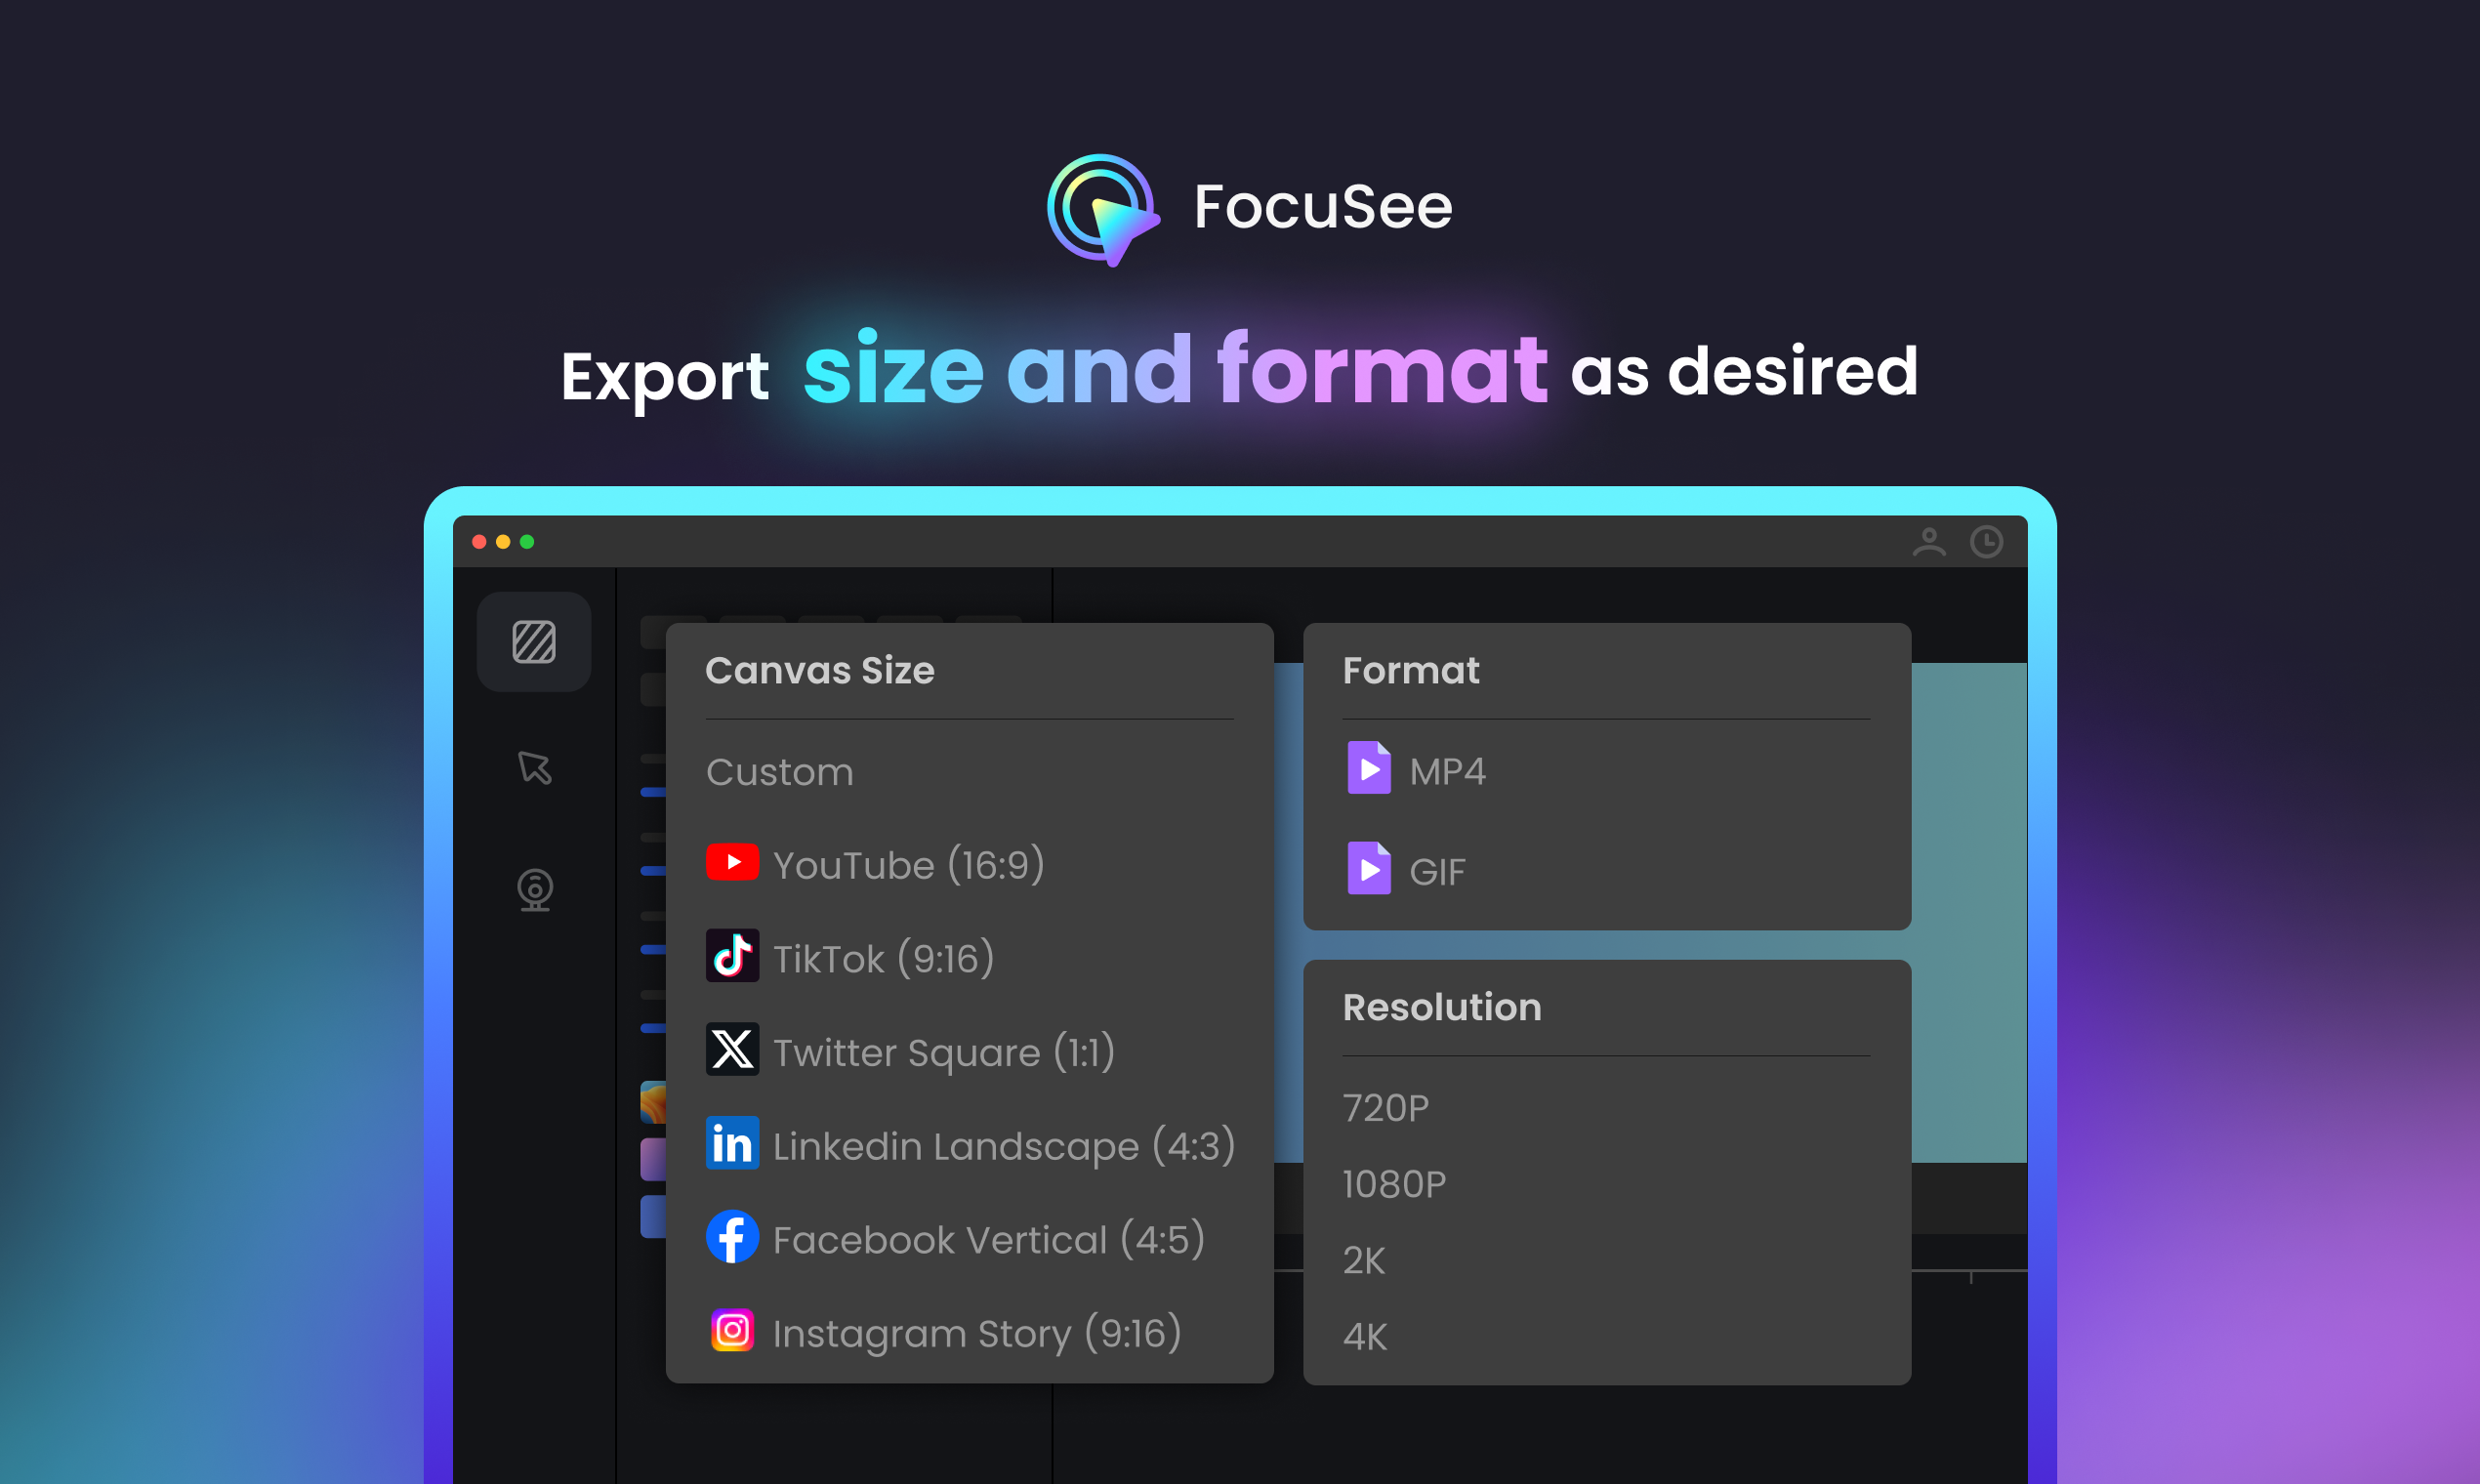 FocuSee multiple export size and format options